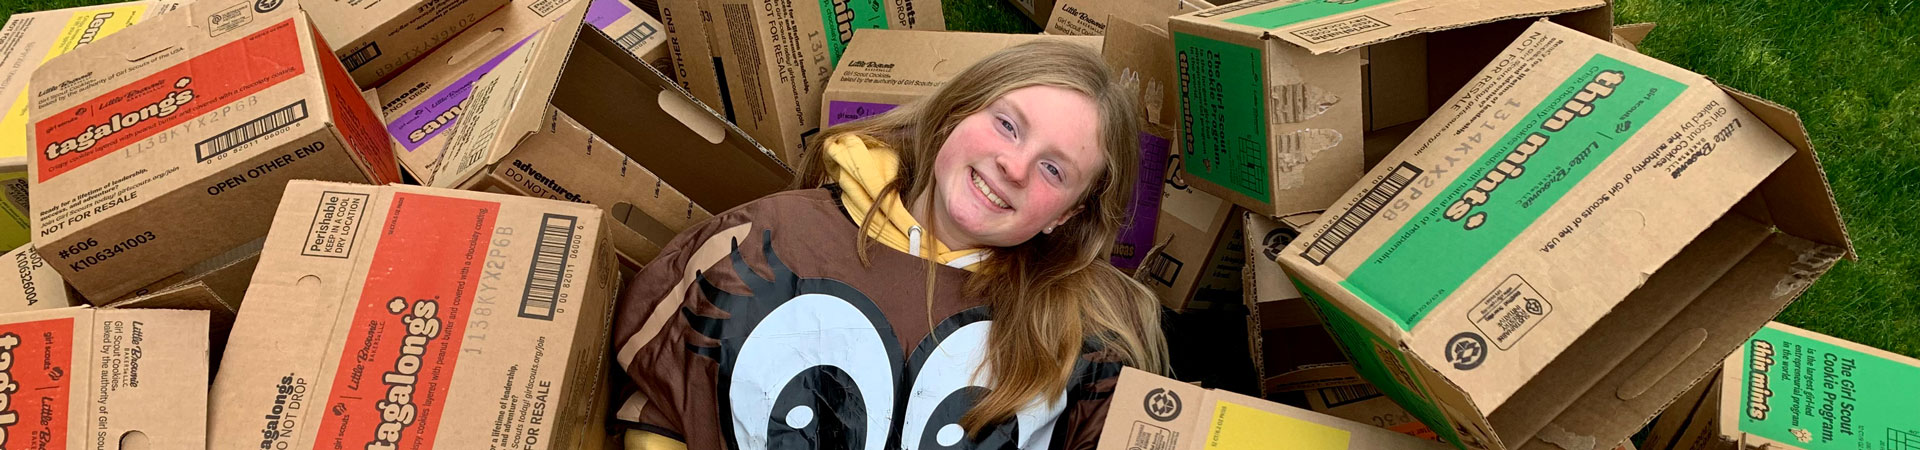  A Girl Scout dressed in a cookie costume surrounded by cases of various Girl Scout Cookies. 